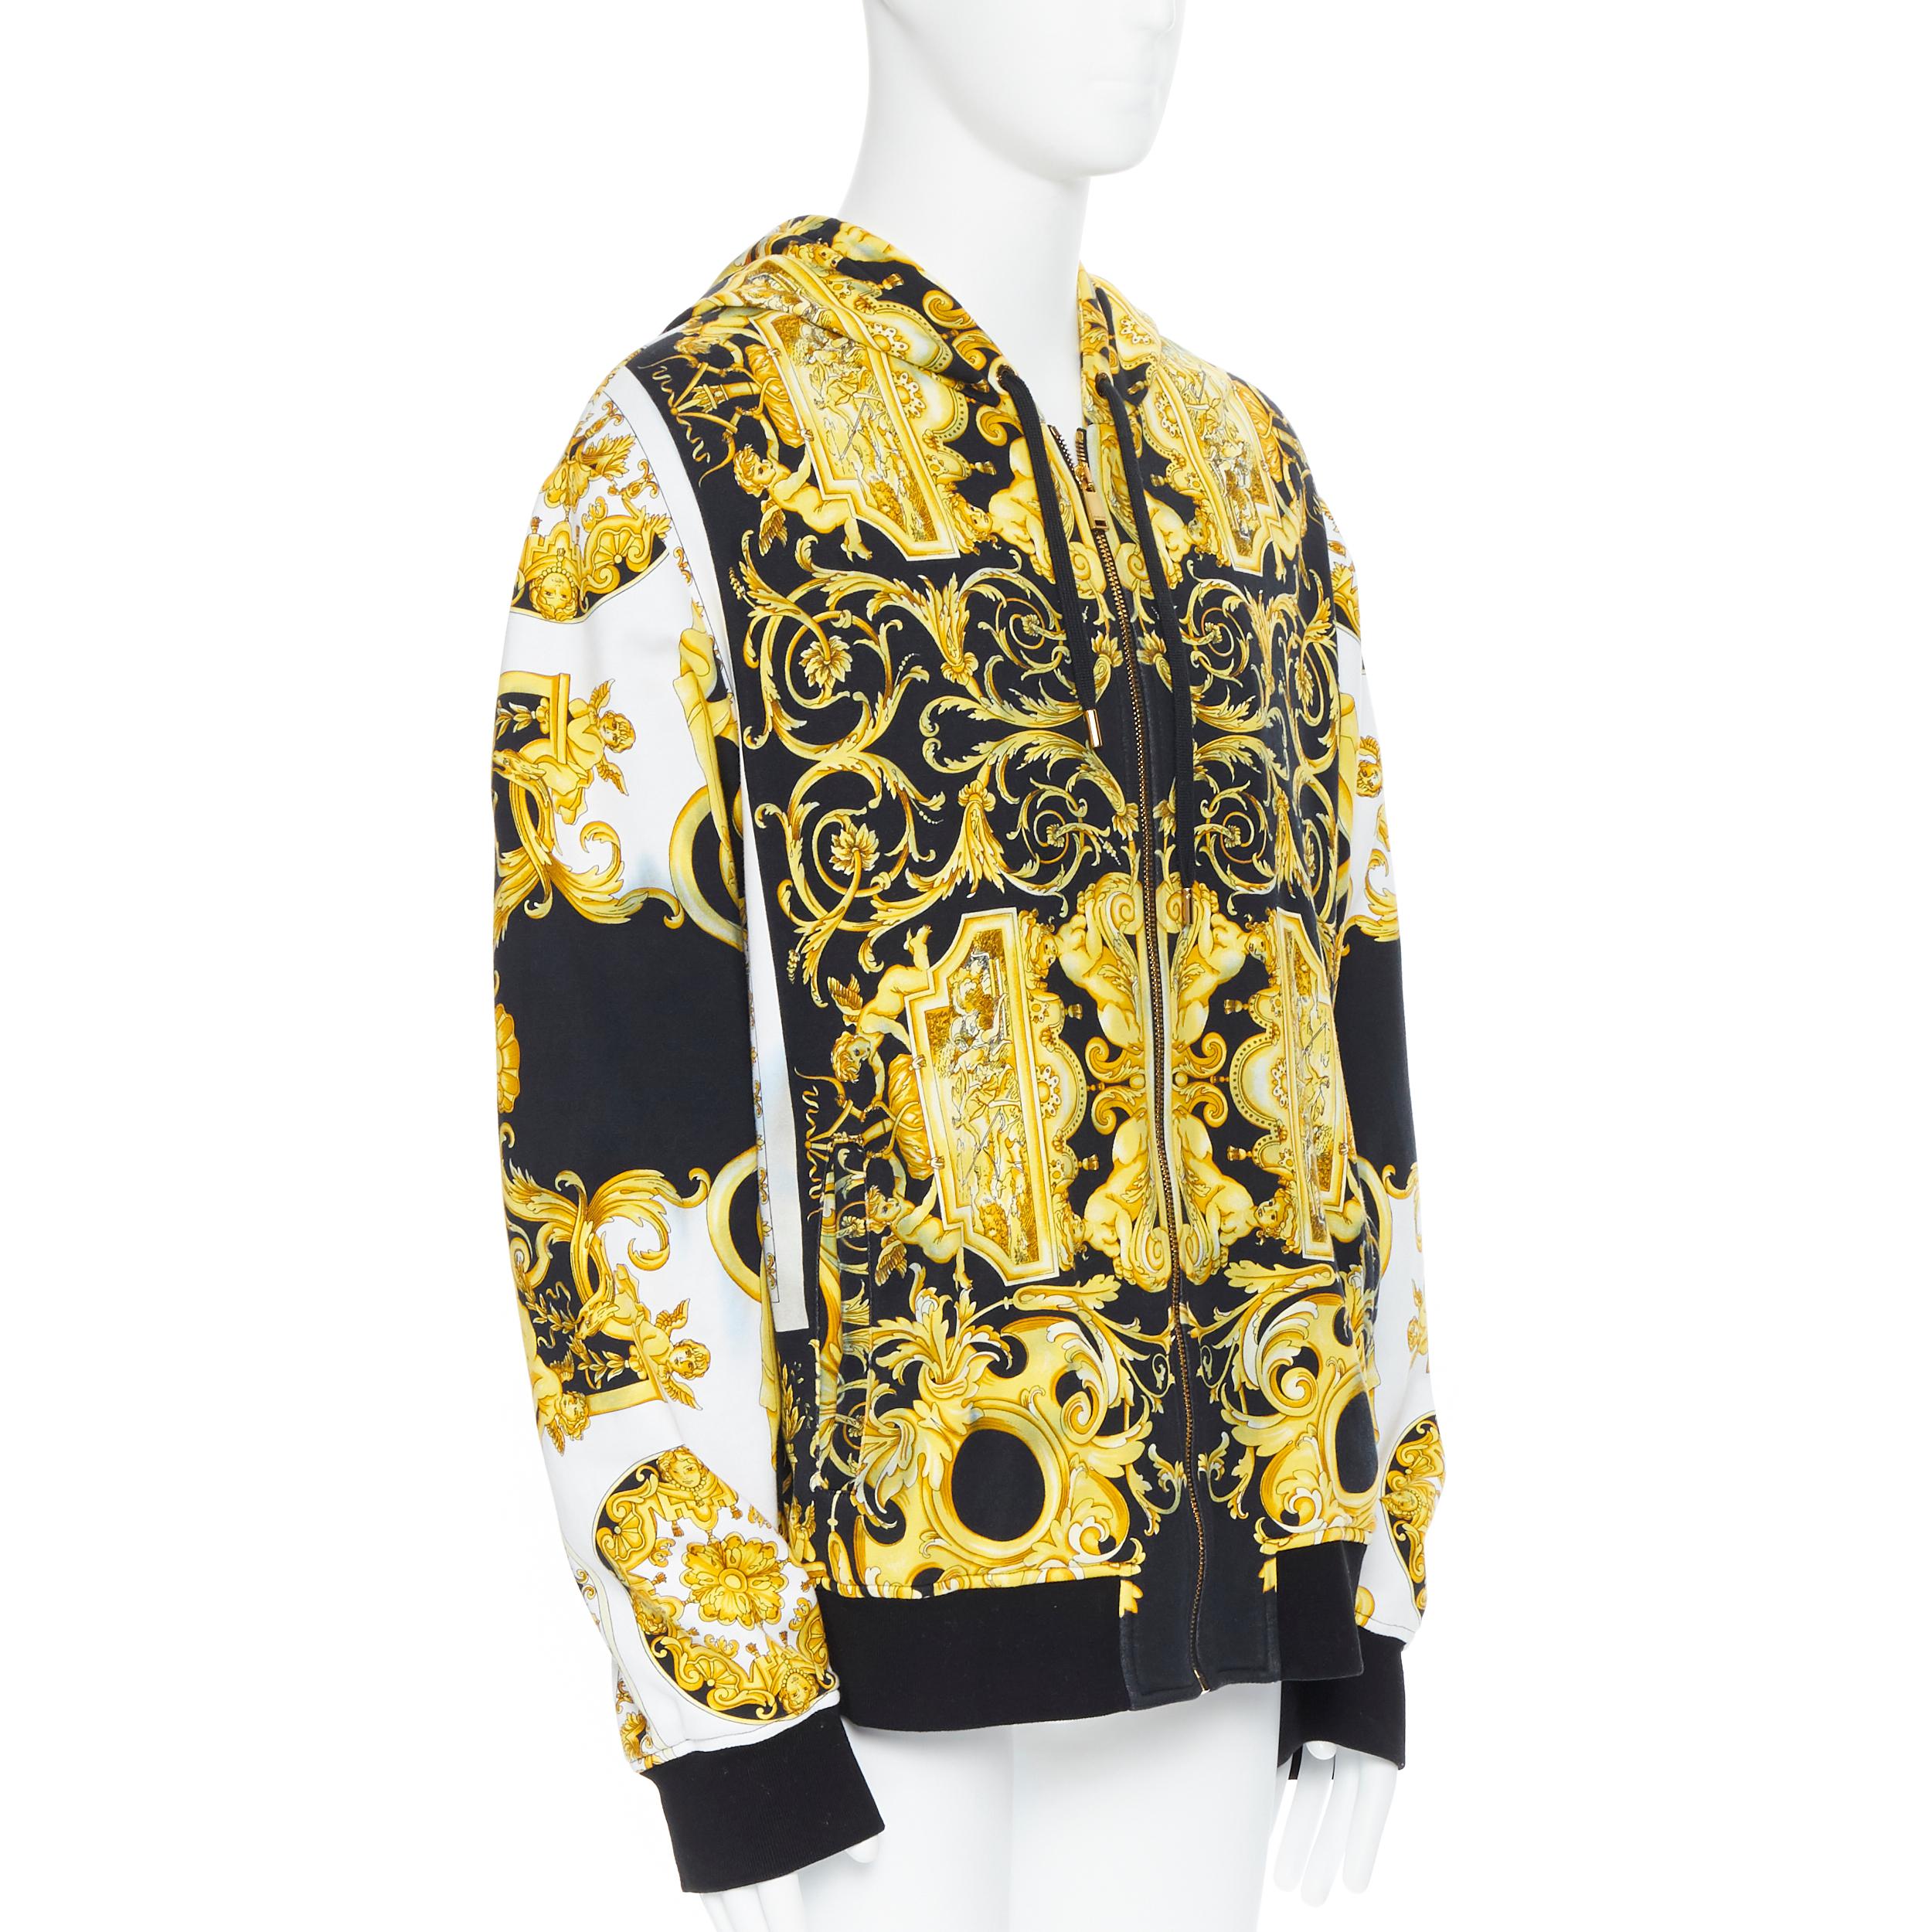 VERSACE Tribute Baroque 1992 gold black cotton barocco print zip up hoodie 5XL
Brand: Versace
Designer: Donatella Versace
Collection: 2018
Model Name / Style: Hoodie
Material: Cotton
Color: Gold, black
Pattern: Floral
Closure: Zip
Extra Detail: